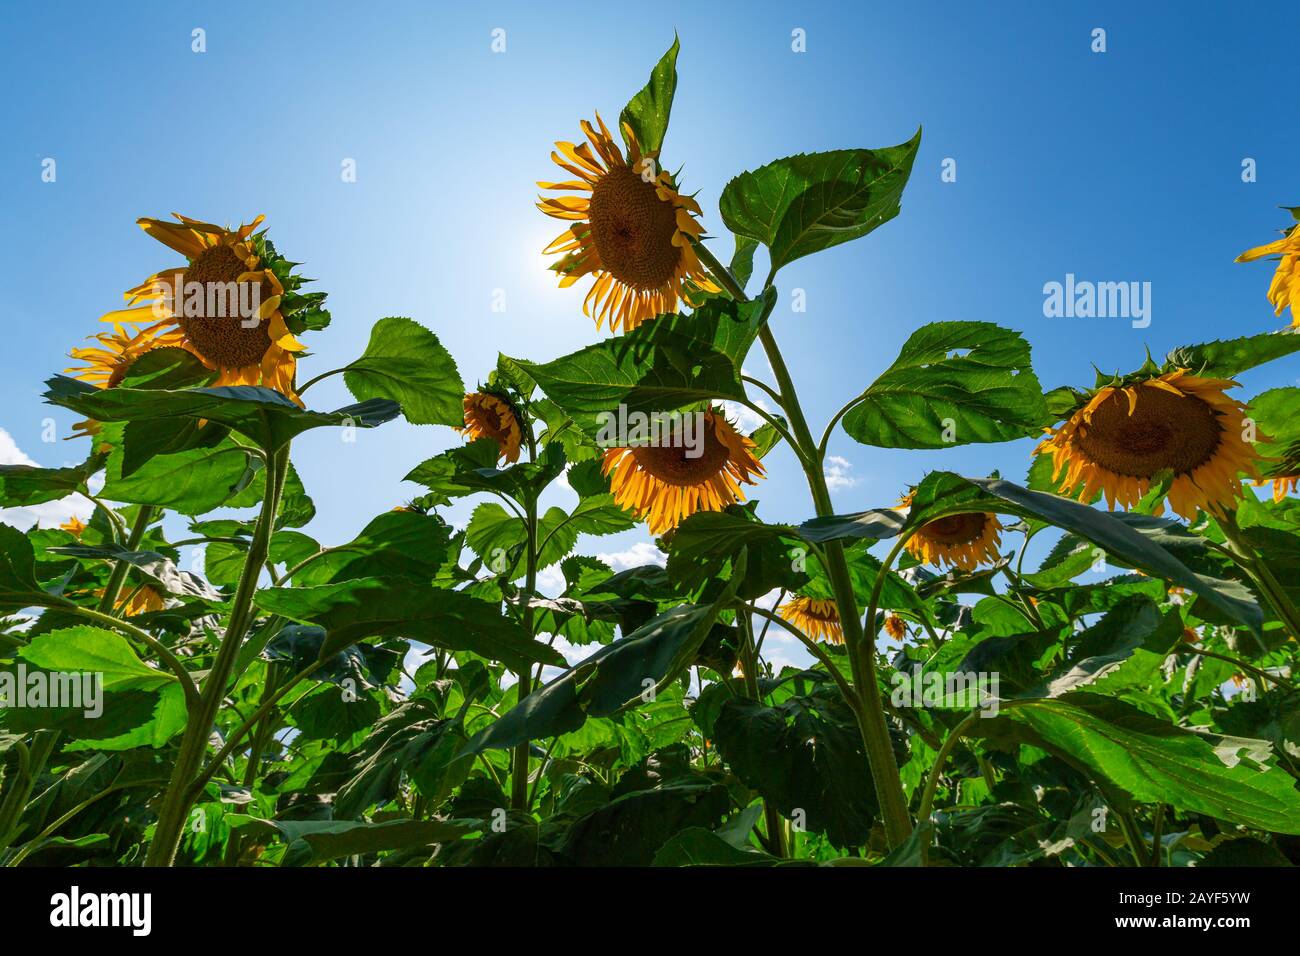 Flowers sunflowers on a background of blue sky Stock Photo